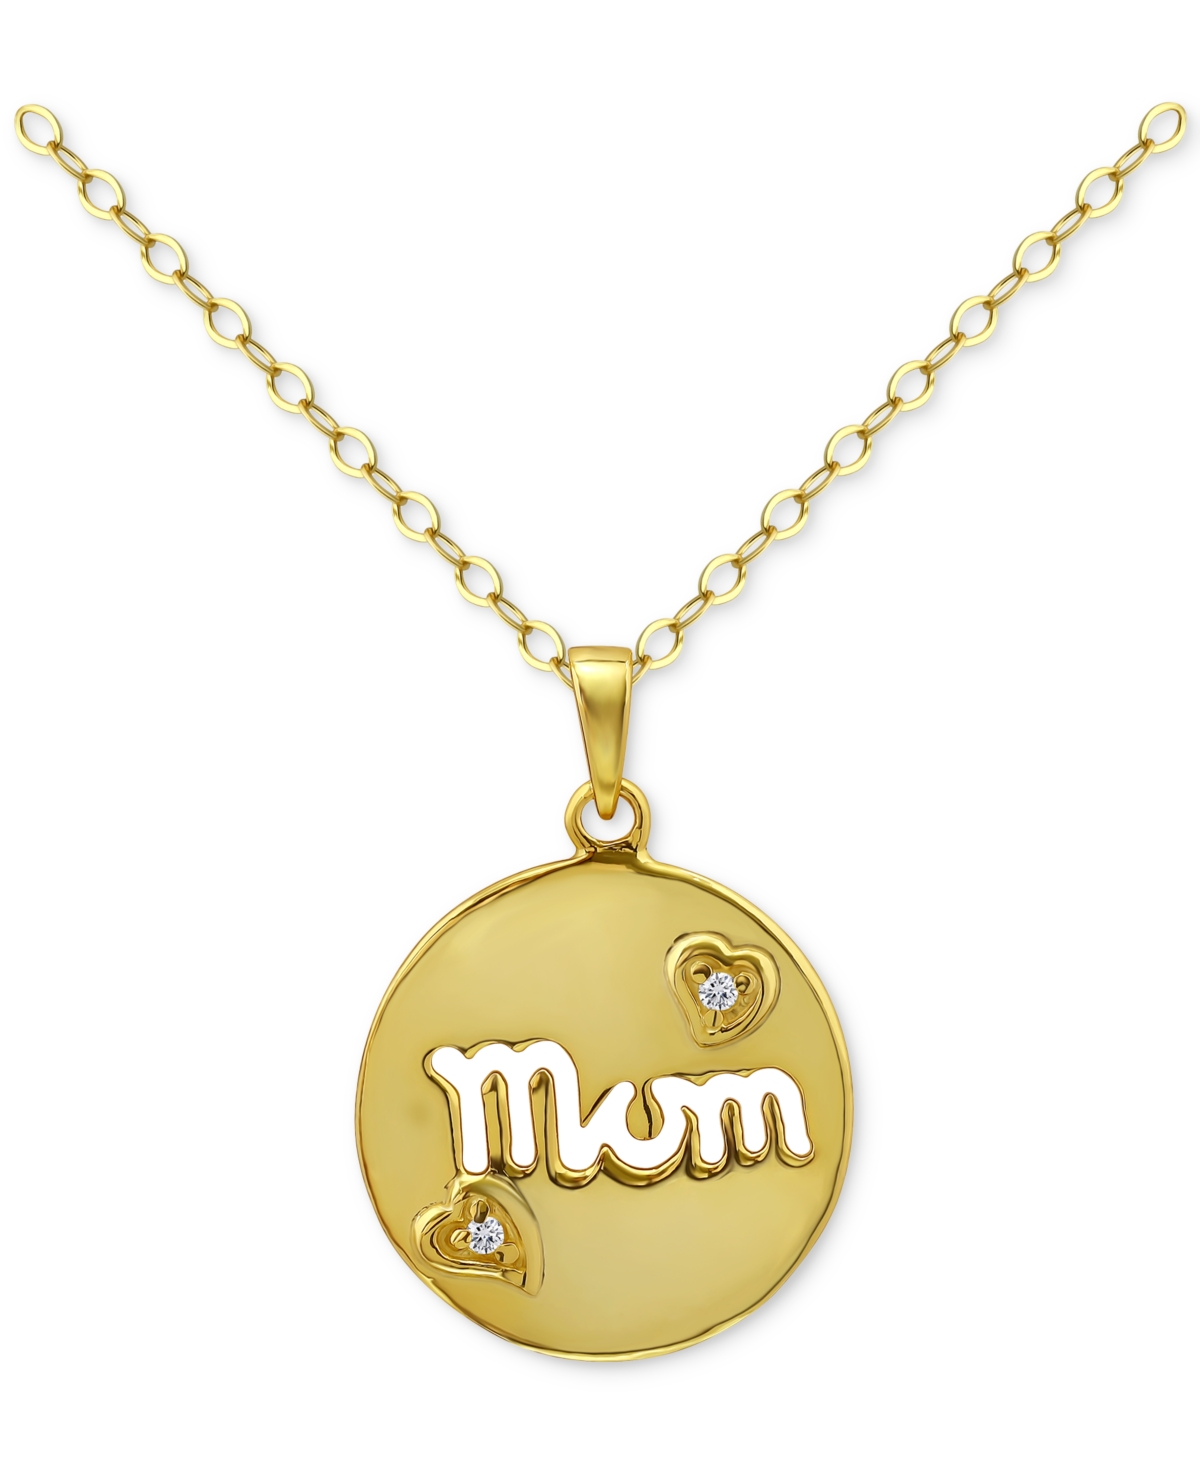 Giani Bernini Cubic Zirconia Mom Heart Disc Pendant Necklace In 18k Gold-plated Sterling Silver, 16" + 2" Extender